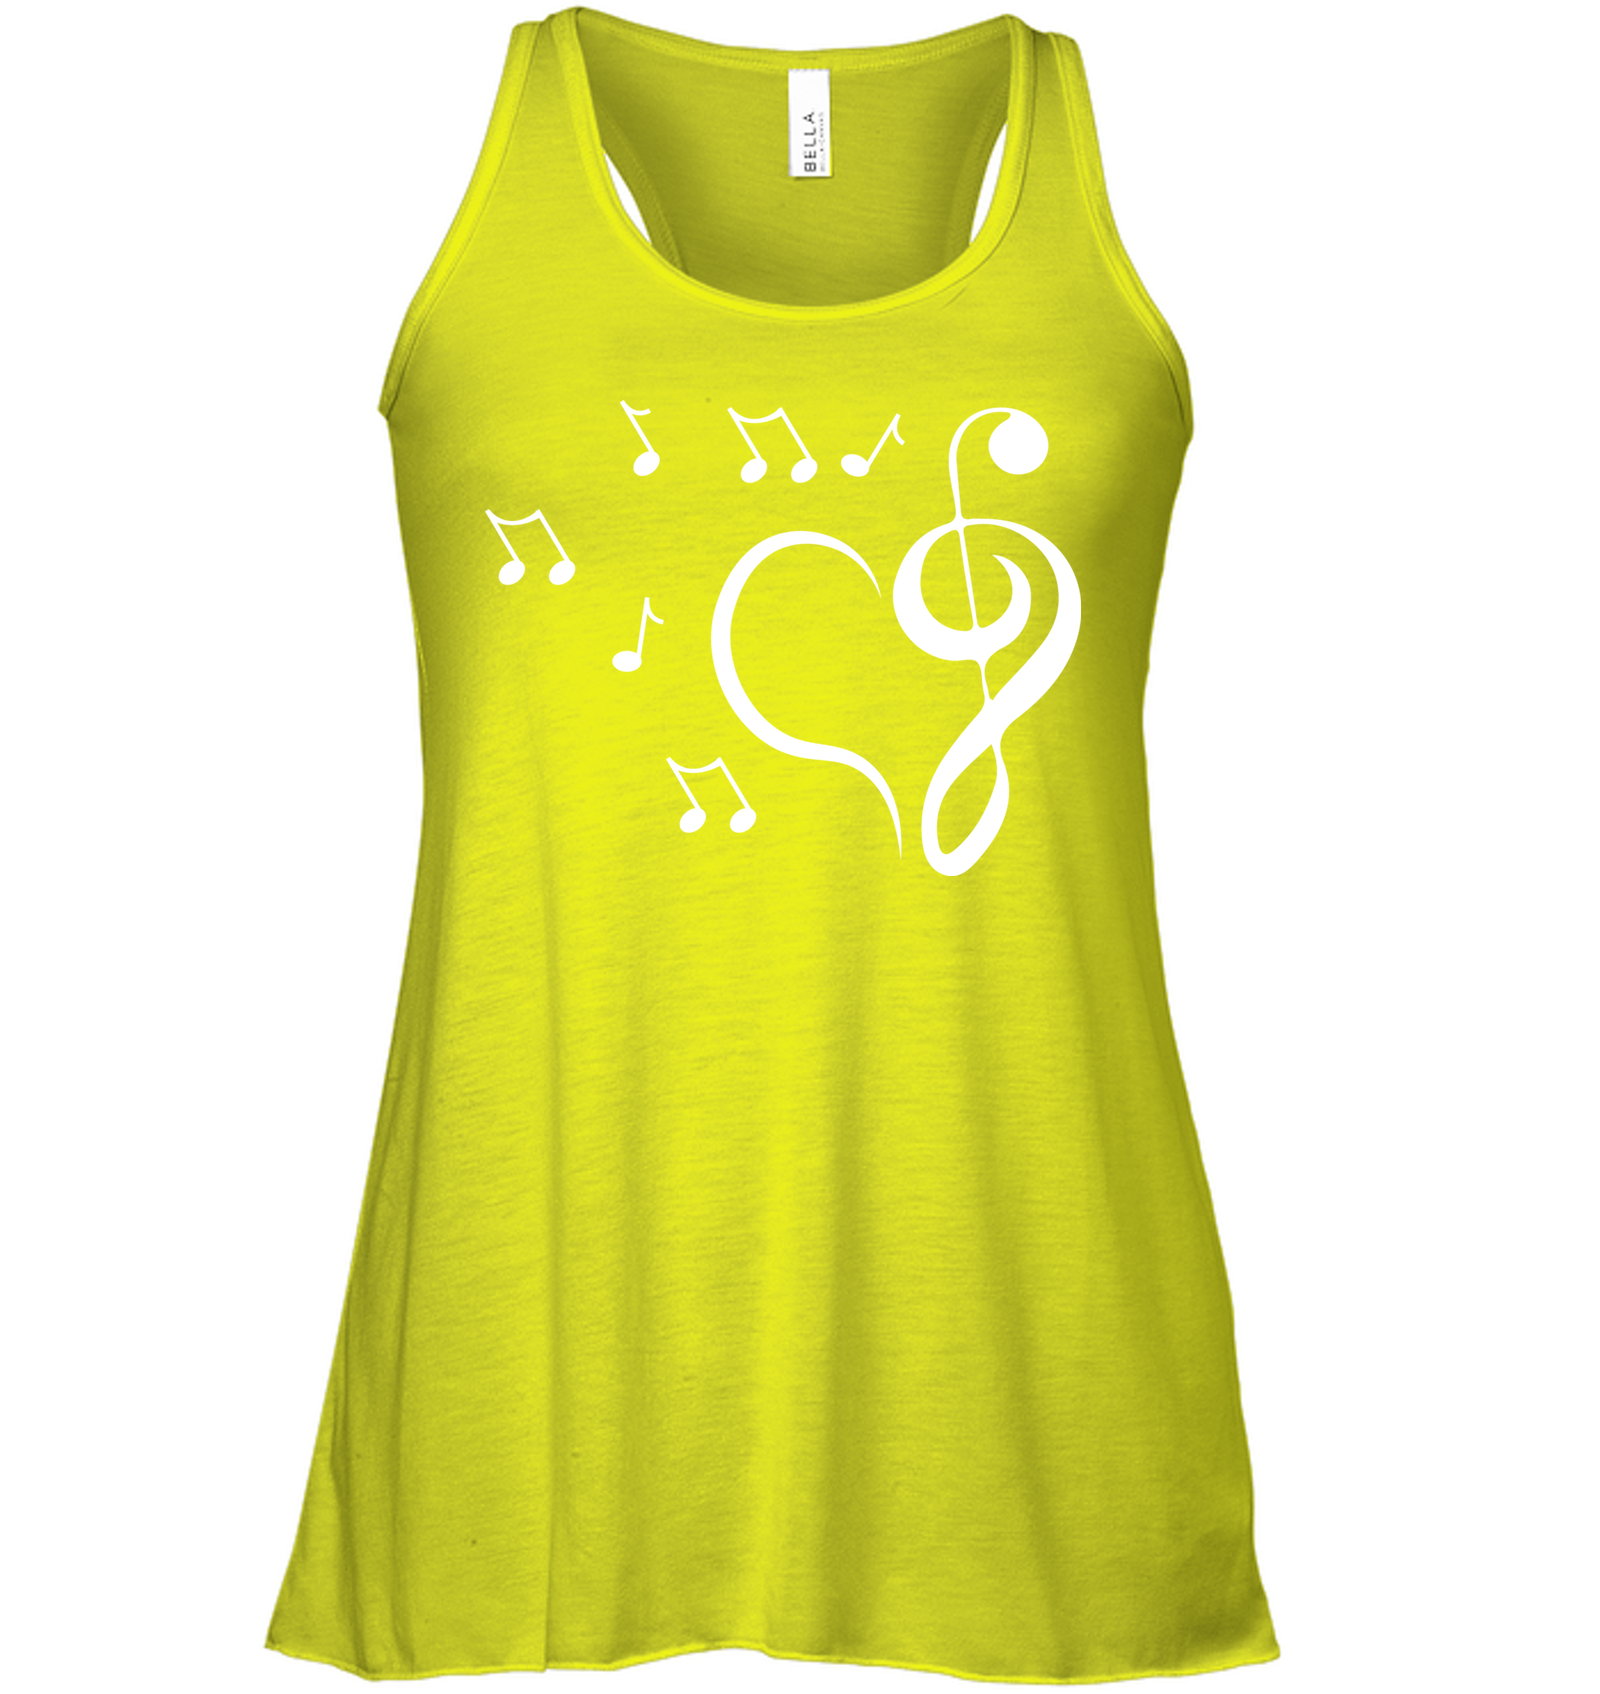 Musical heart with floating notes - Bella + Canvas Women's Flowy Racerback Tank